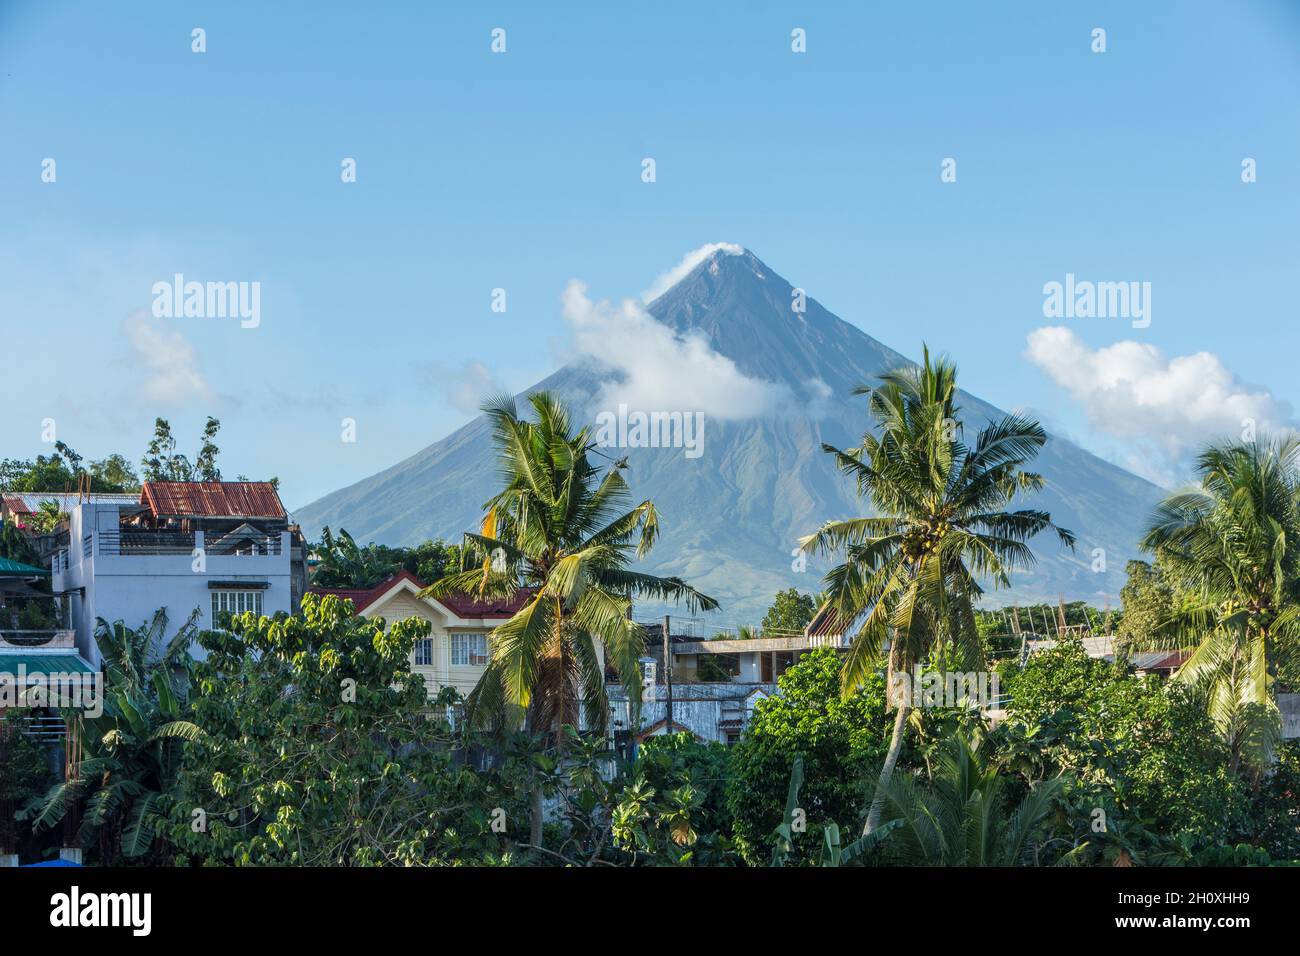 Mount Mayon, the most active stratovolcano of the Philippines. Seen from the city of Legazpi, Albay Province,  Bicol Region, Luzon island Stock Photo